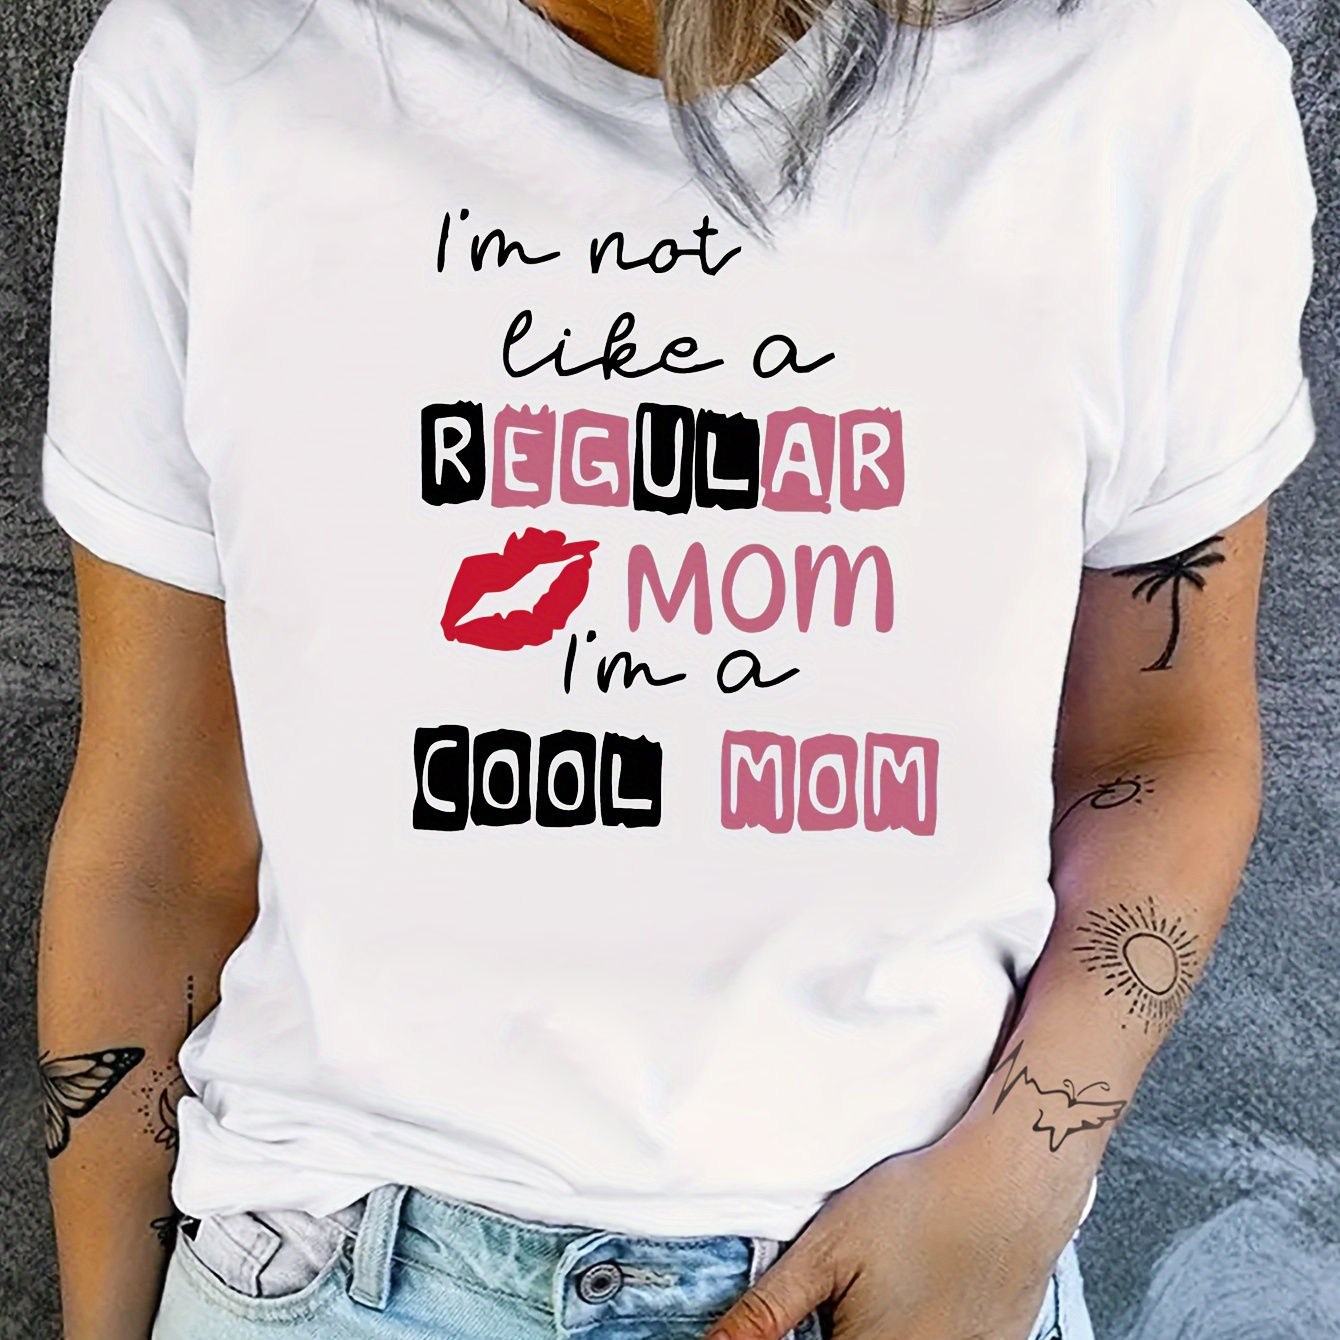 

I'm A Cool Mom Print T-shirt, Short Sleeve Crew Neck Casual Top For Summer & Spring, Women's Clothing